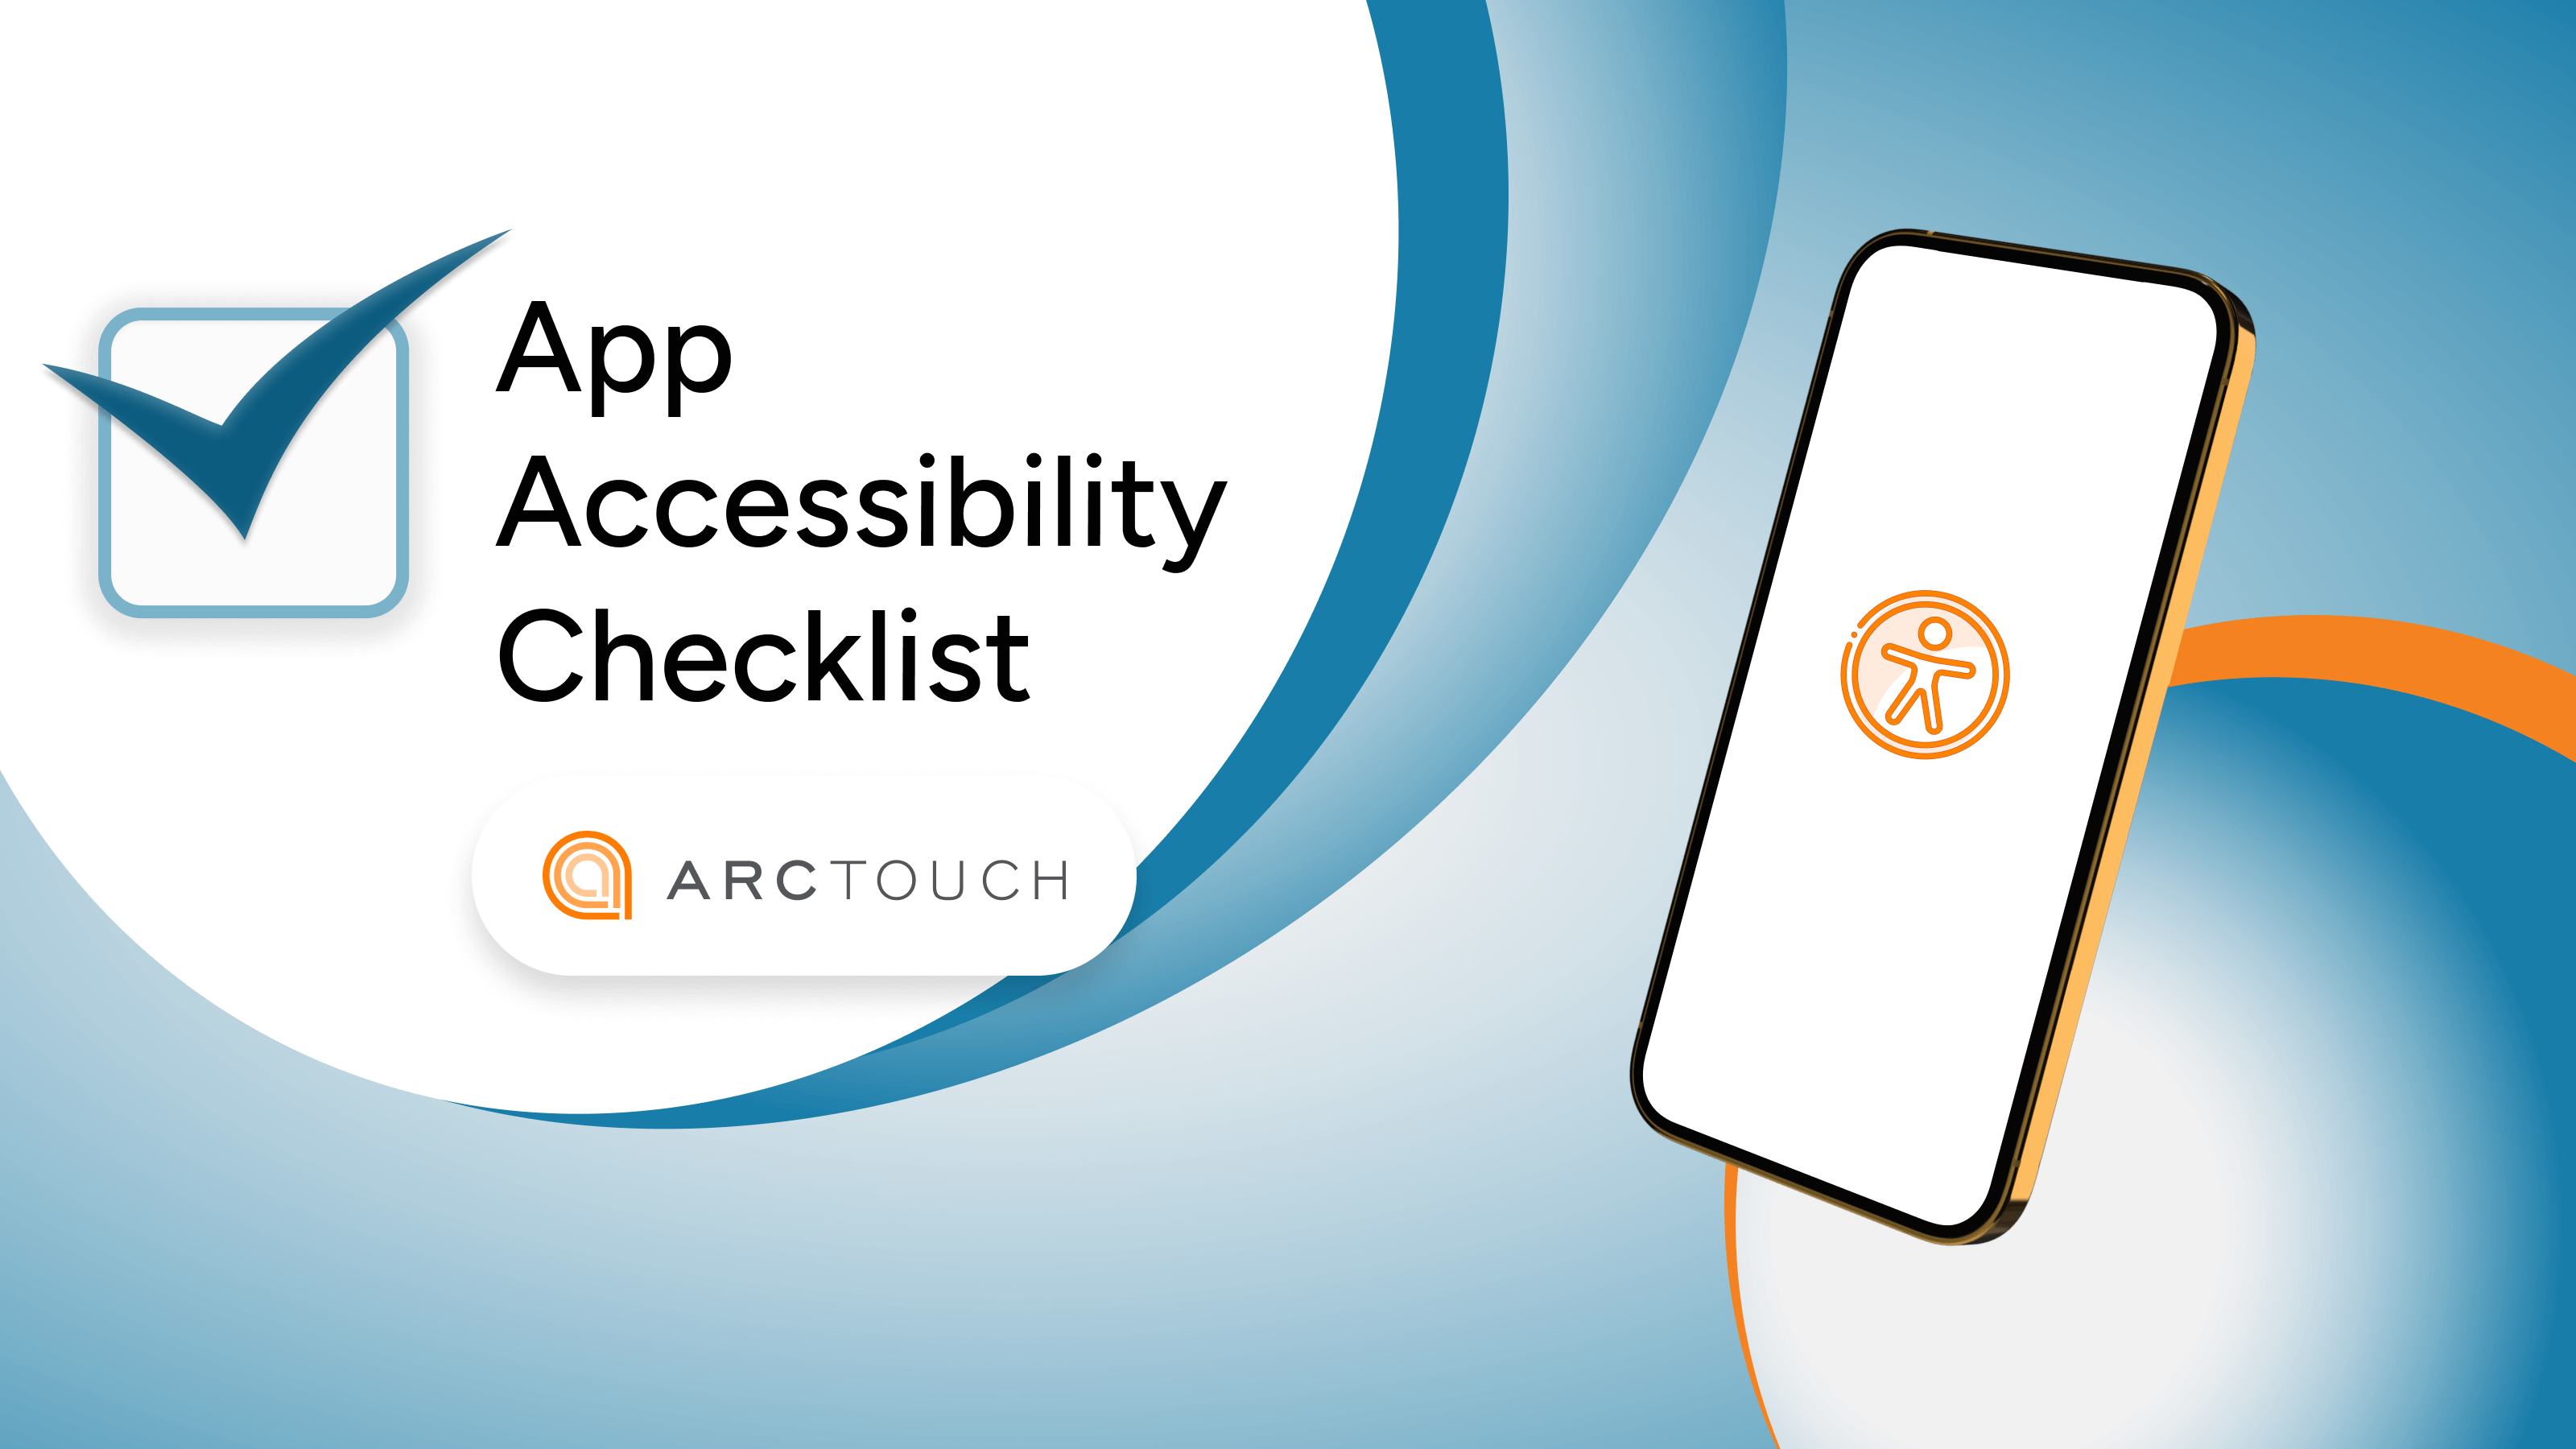 On the left is text that reads App Accessibility Checklist and the ArcTouch logo. On the right is a smartphone with an orange accessibility icon on a white screen.